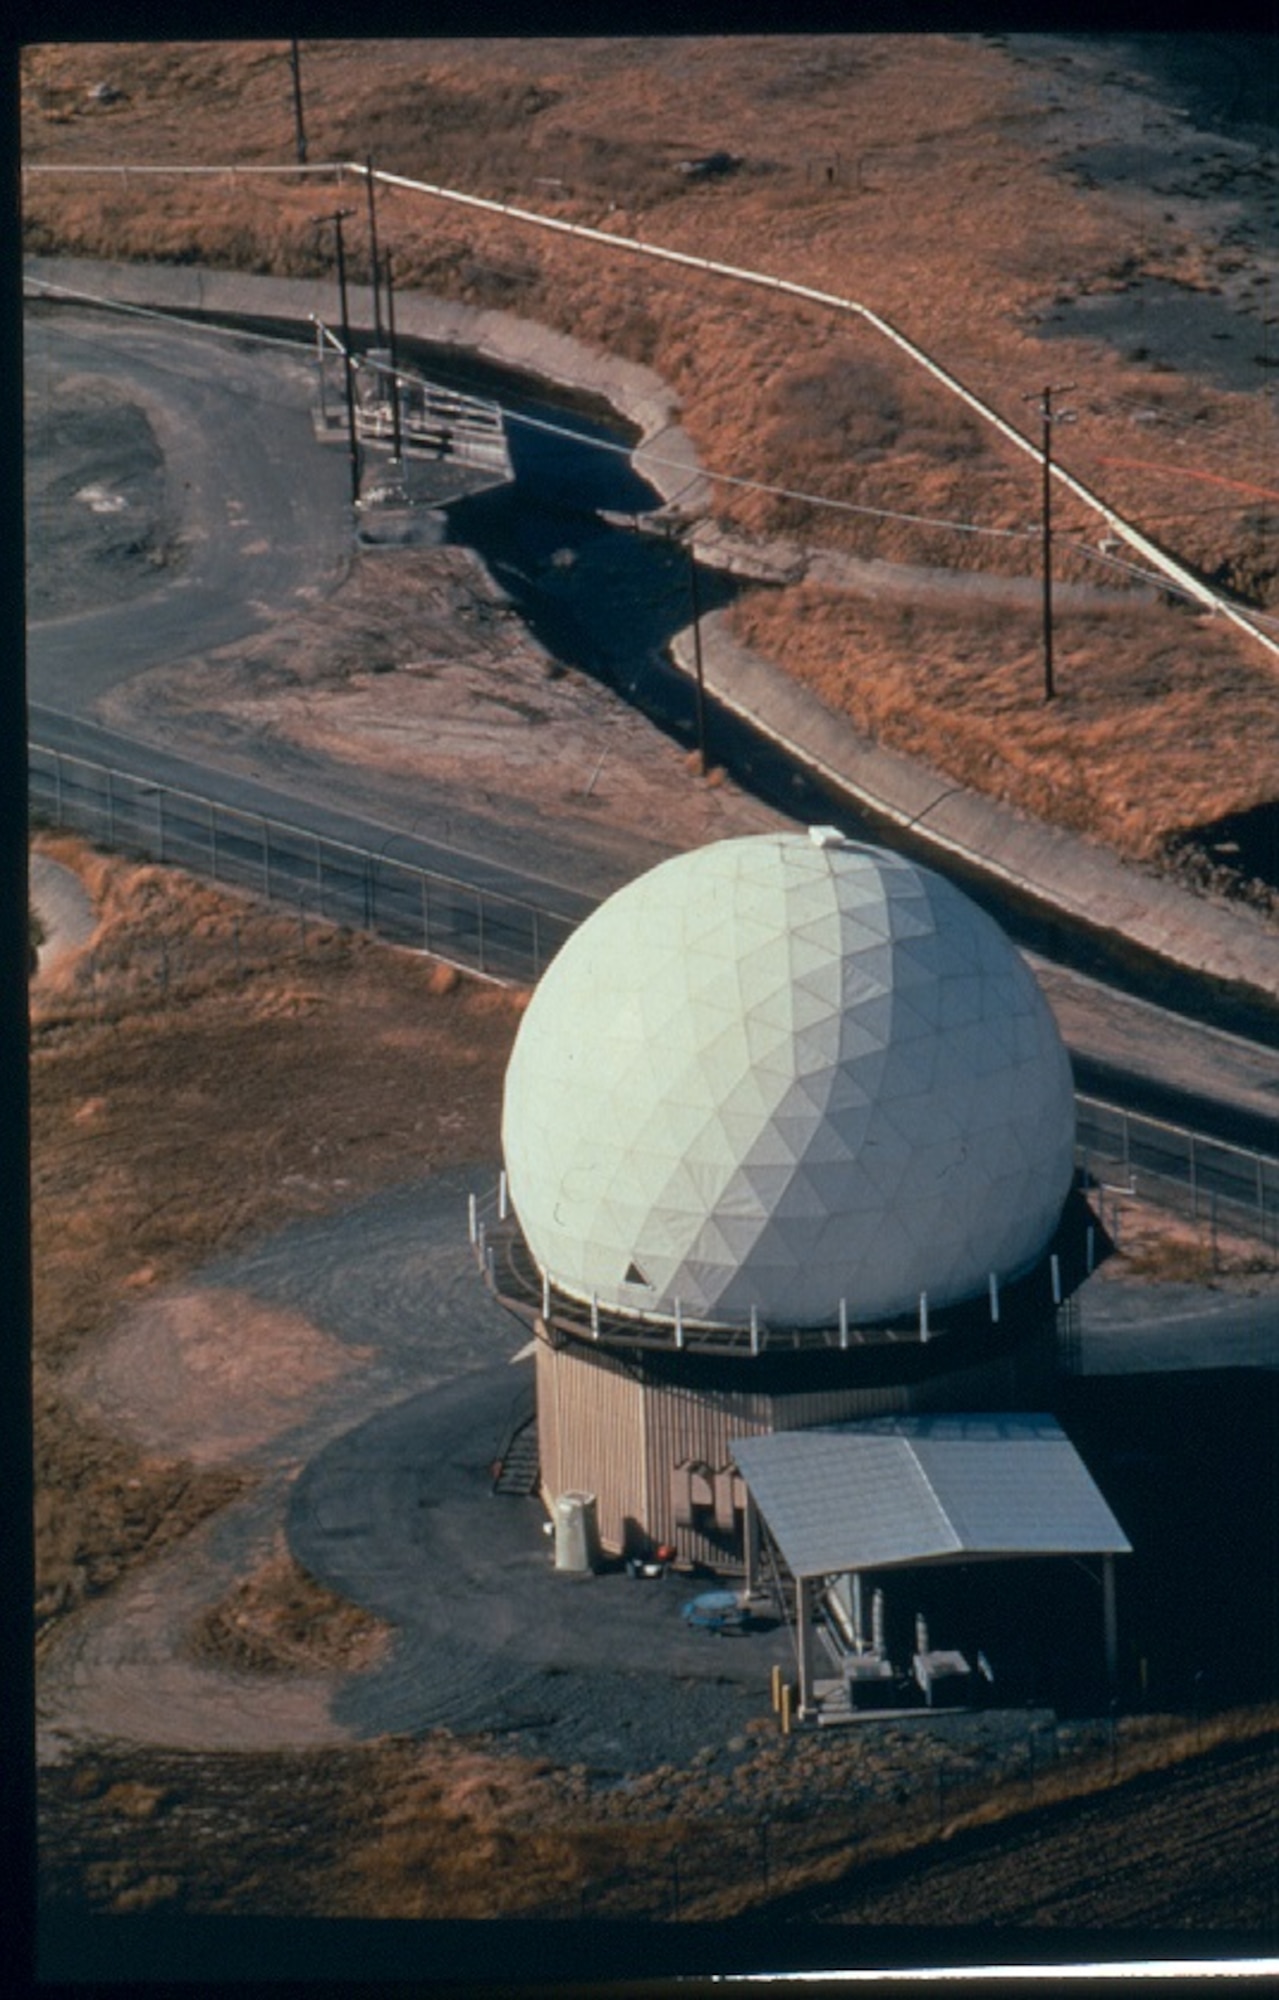 On July 13, 2001 the Air Force officially closed McClellan Air Force Base after 65 years of operation.  The former base began its conversion from an active military base to a vital business park.  Facilities on the former base, such as the Radar Facility pictured here in 1992, are being utilized by businesses like the Wildlife Care Association animal rehabilitation center. (U.S. Air Force Courtesy Photo)